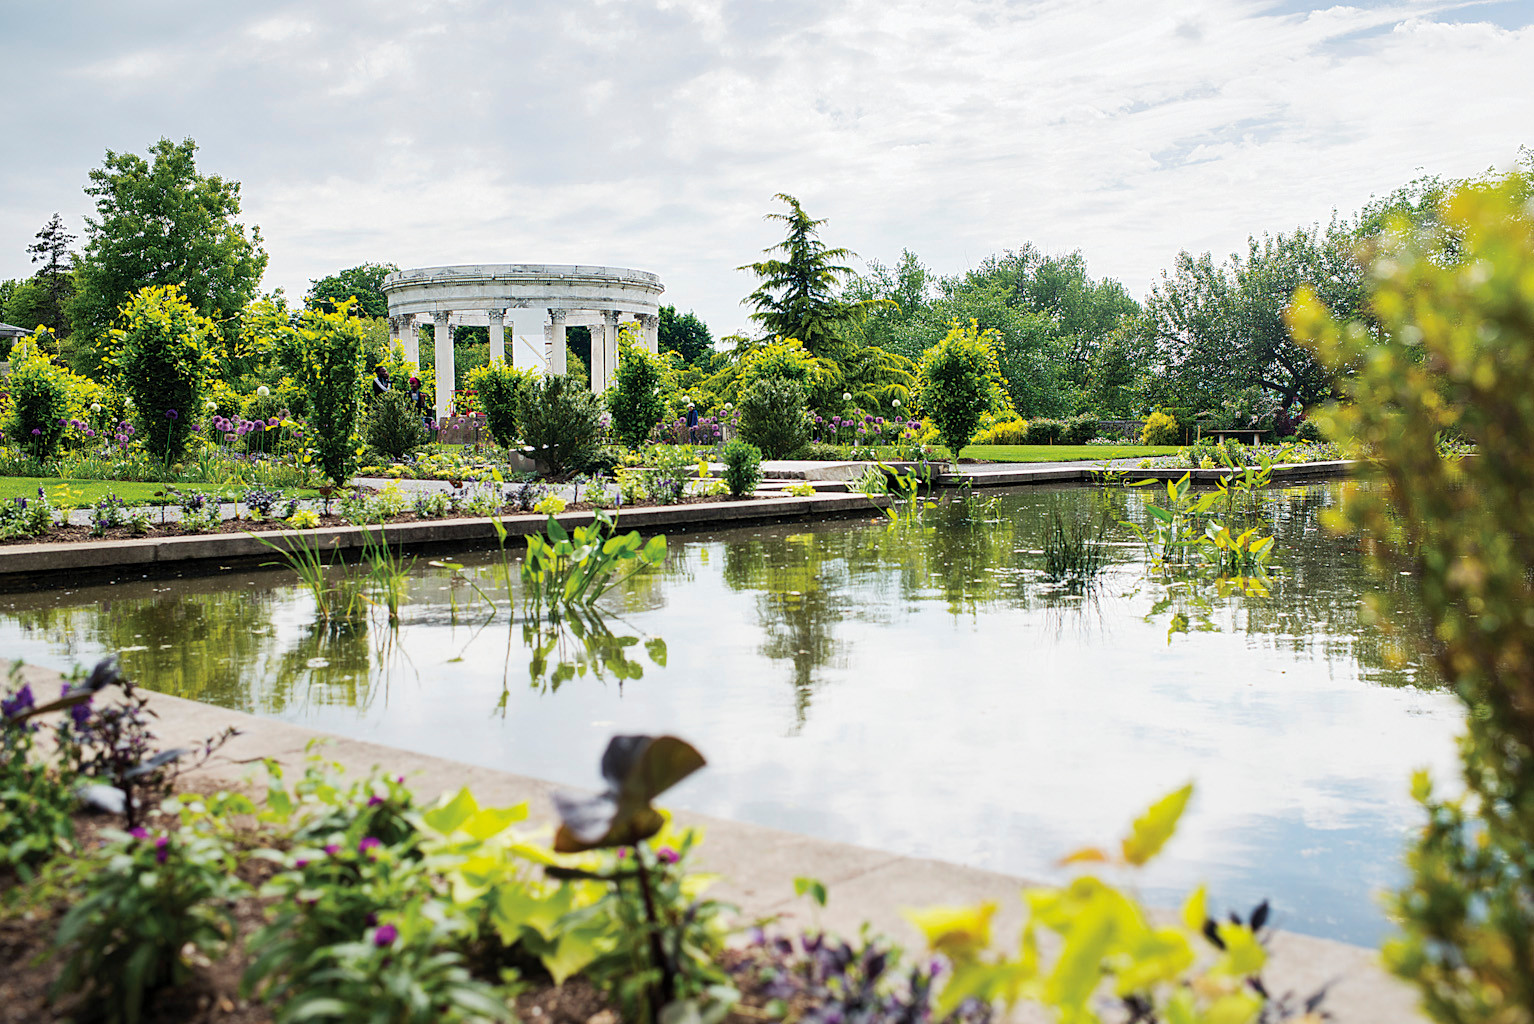 Greco-Roman columns overlook the reflecting pools in the Walled Gardens at Untermyer Park.